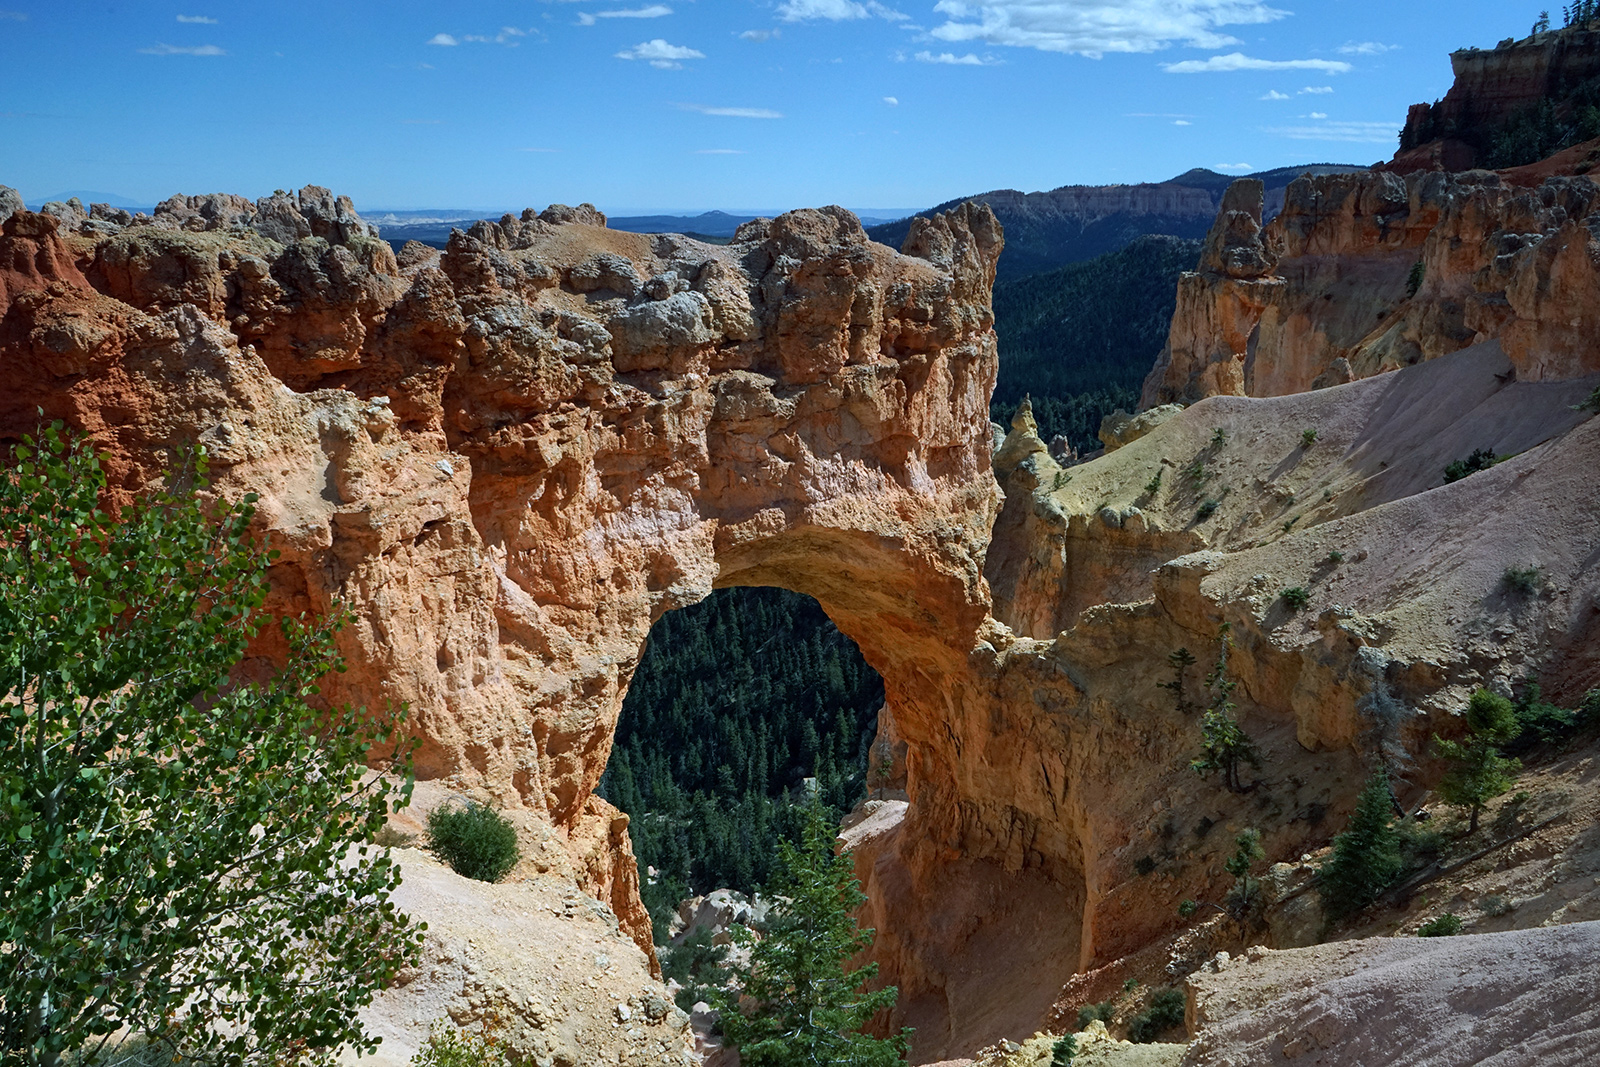 There are even some cool arches formed in the red rocks of Bryce Canyon